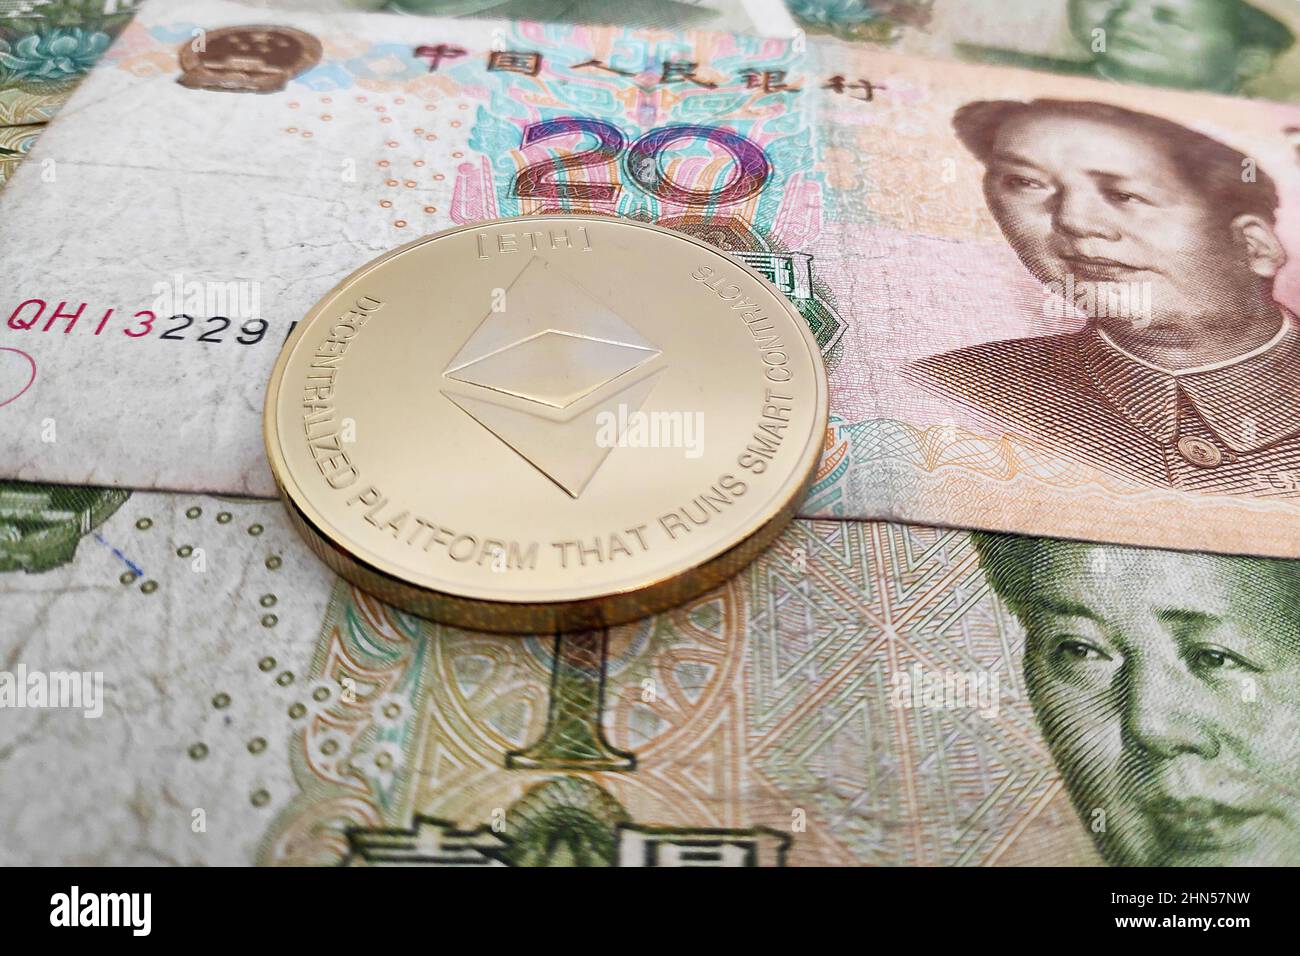 Close-up on a golden Ethereum coin on top of a stack of Chinese Yuan banknotes. Stock Photo